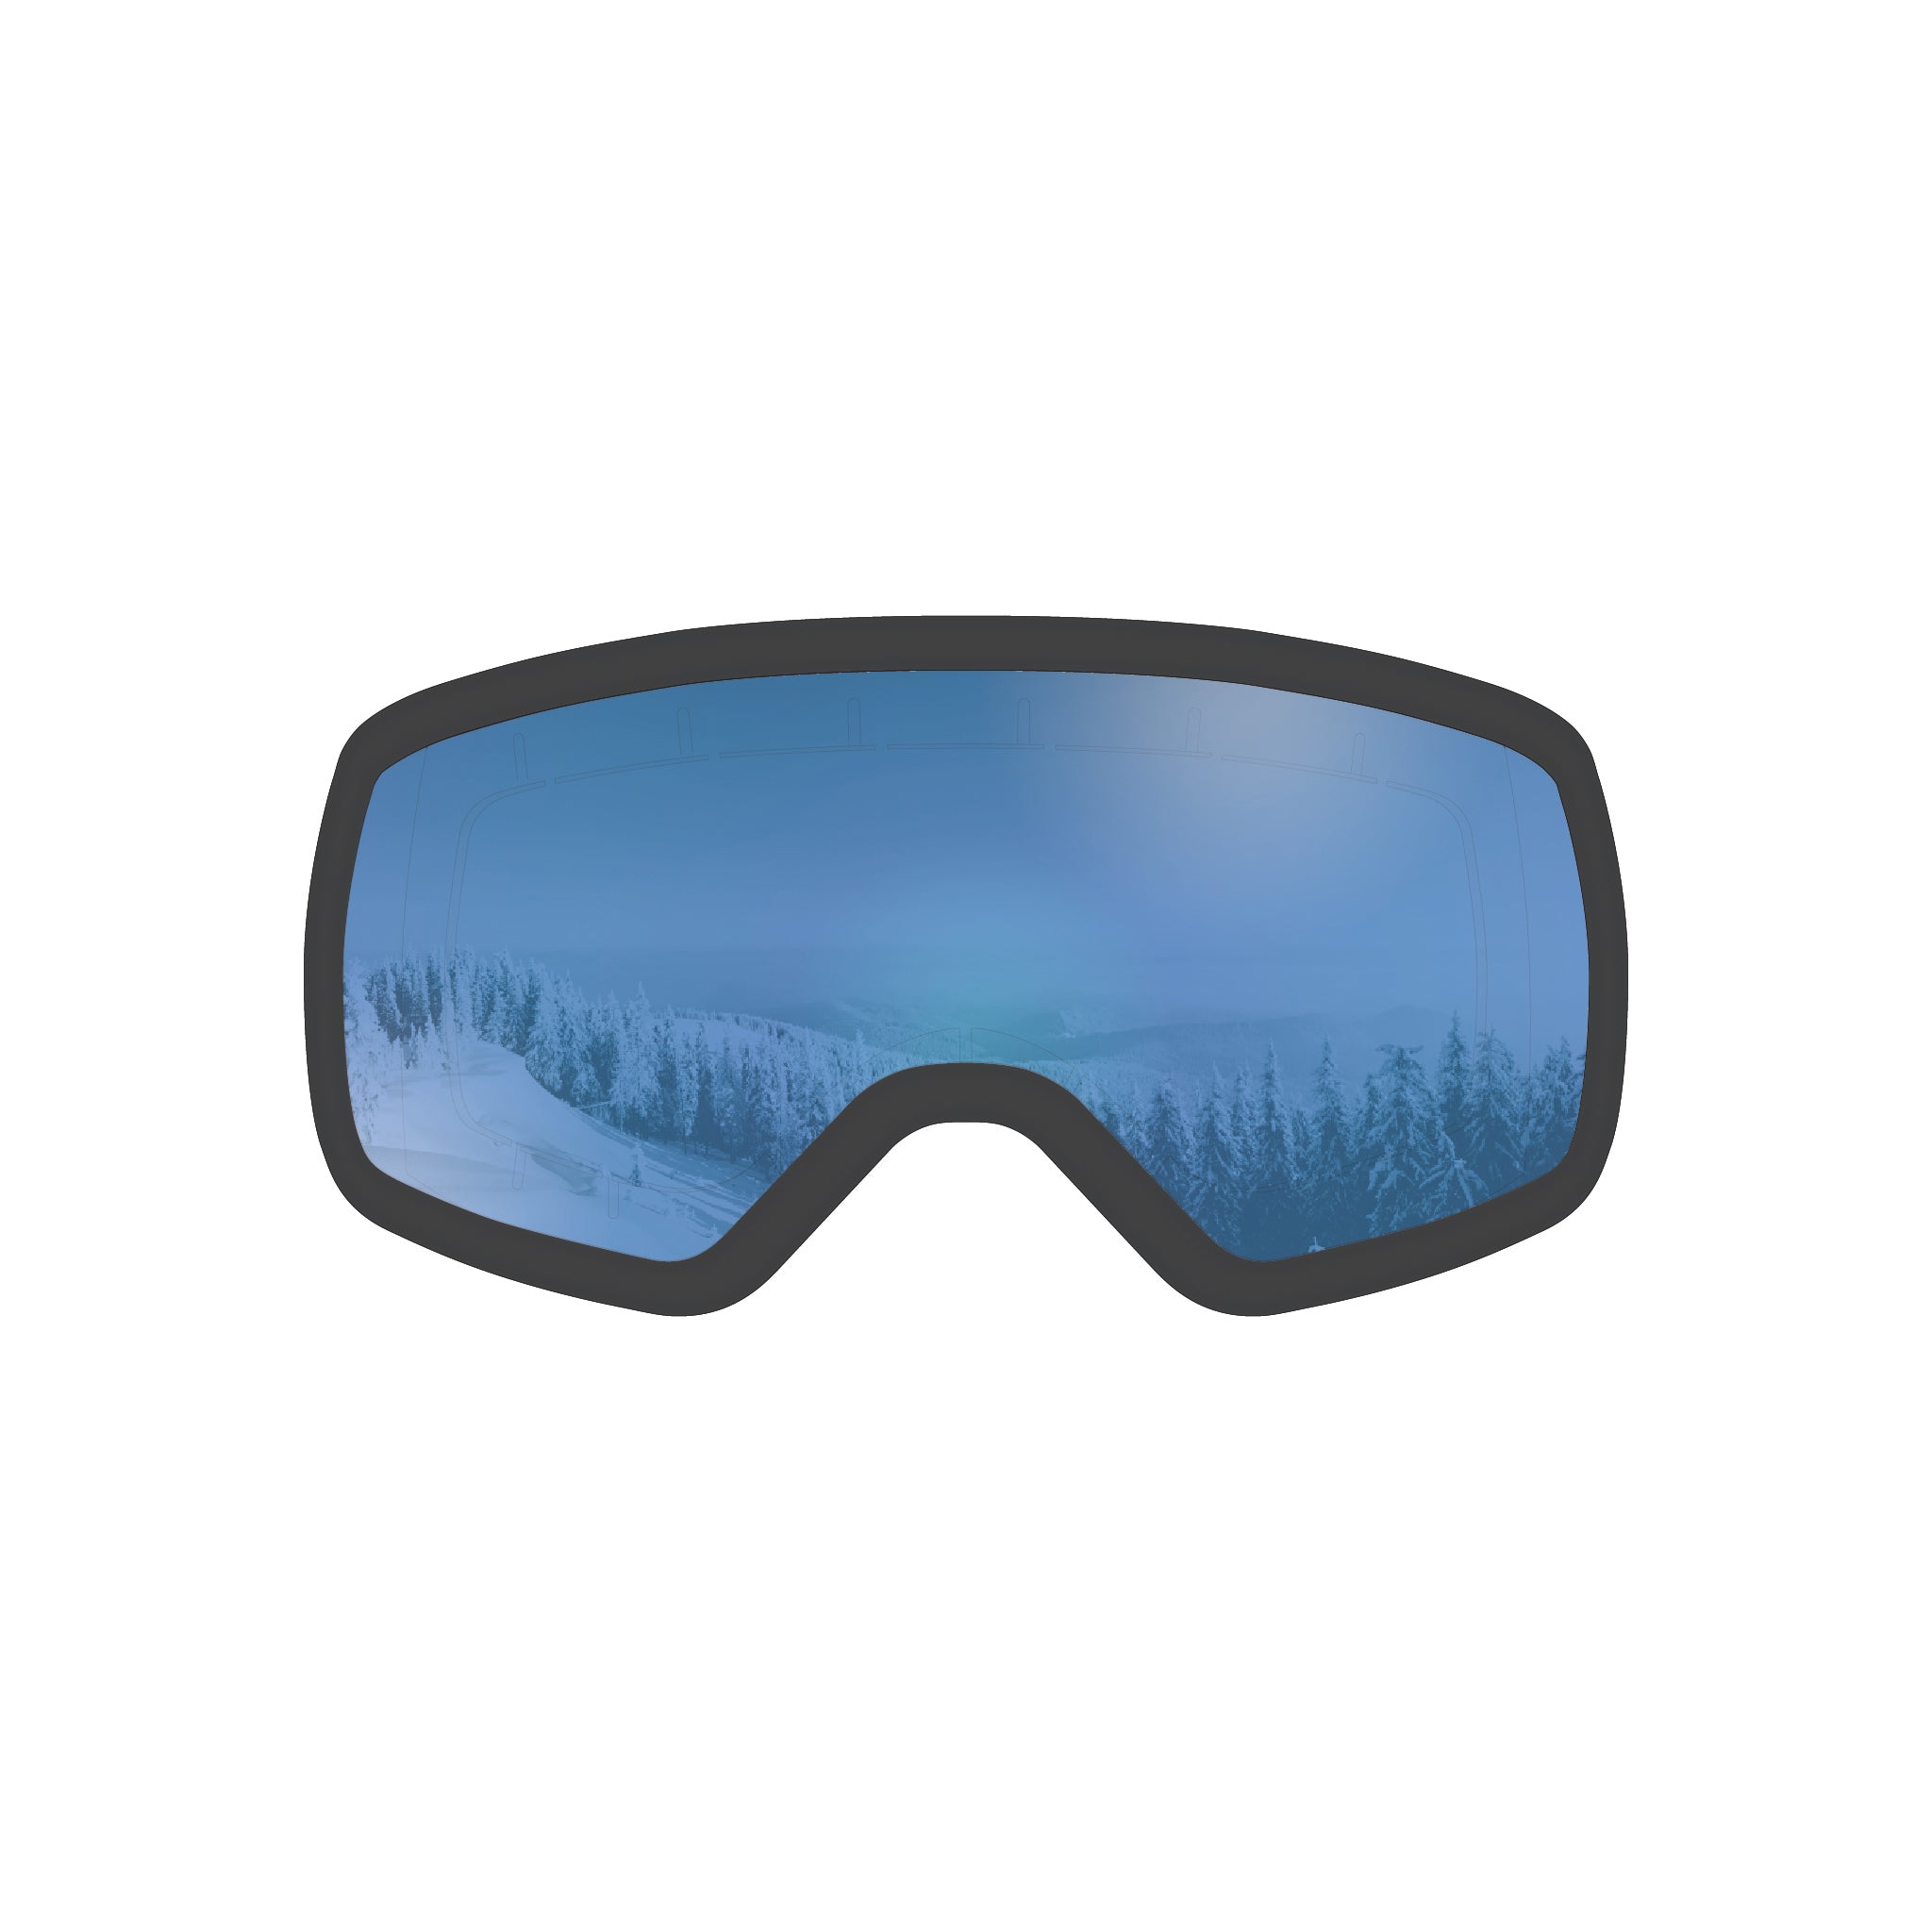 STAGE 8Track Ski Goggle w/ Blue Revo Lens and Black Frame - Fits teens, ages 9 -13. Youth ski goggle.